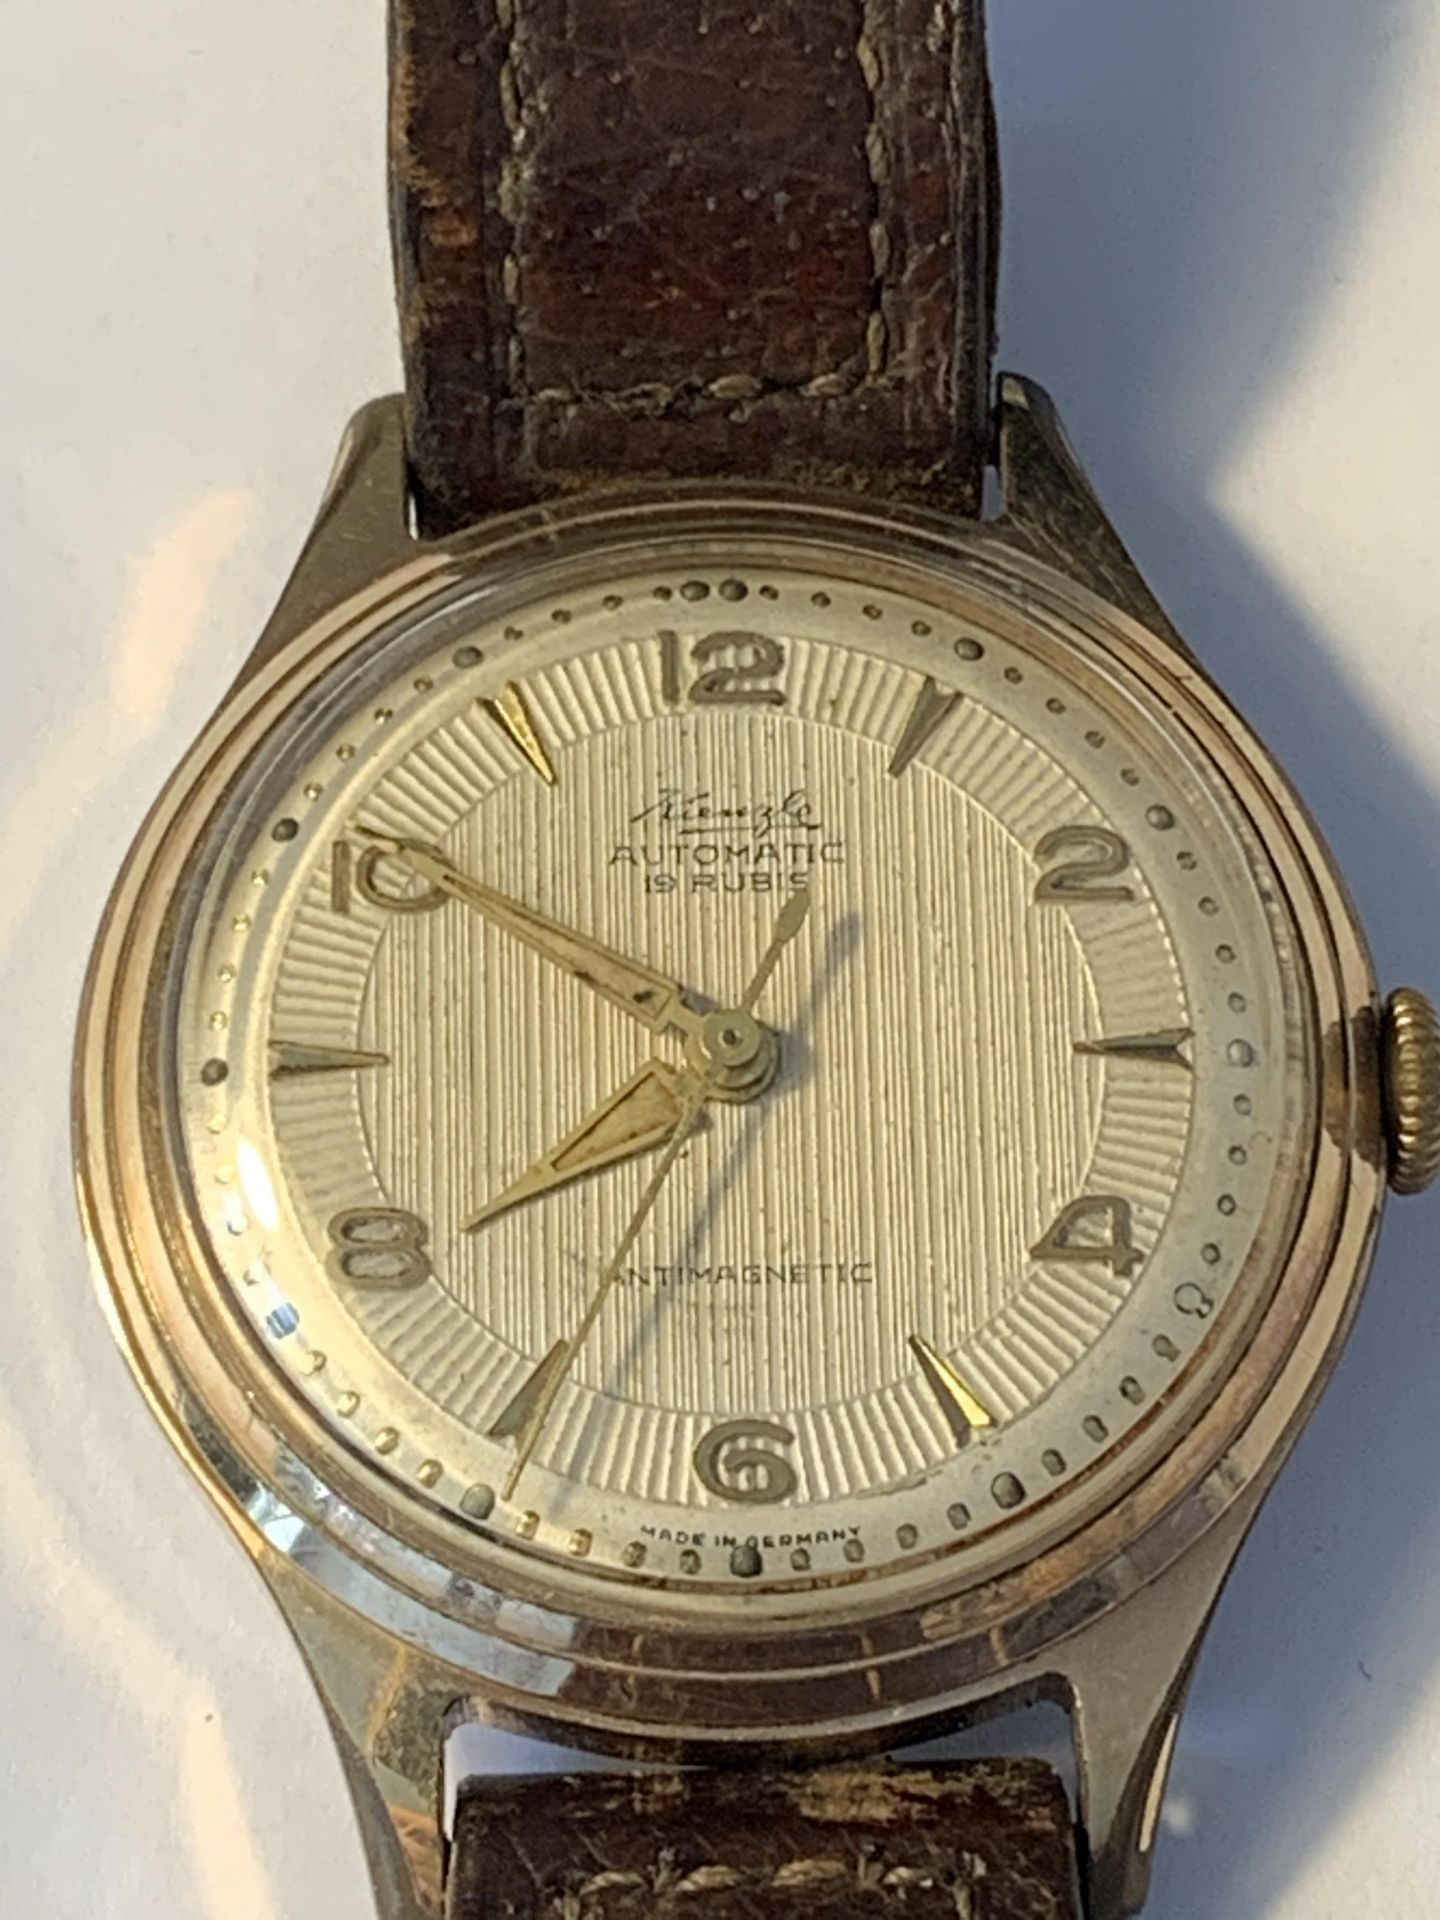 A VINTAGE KIENZLE AUTOMATIC 19 RUBIS ANTIMAGNETIC WRIST WATCH WITH BROWN LEATHER STRAP SEEN - Image 2 of 3